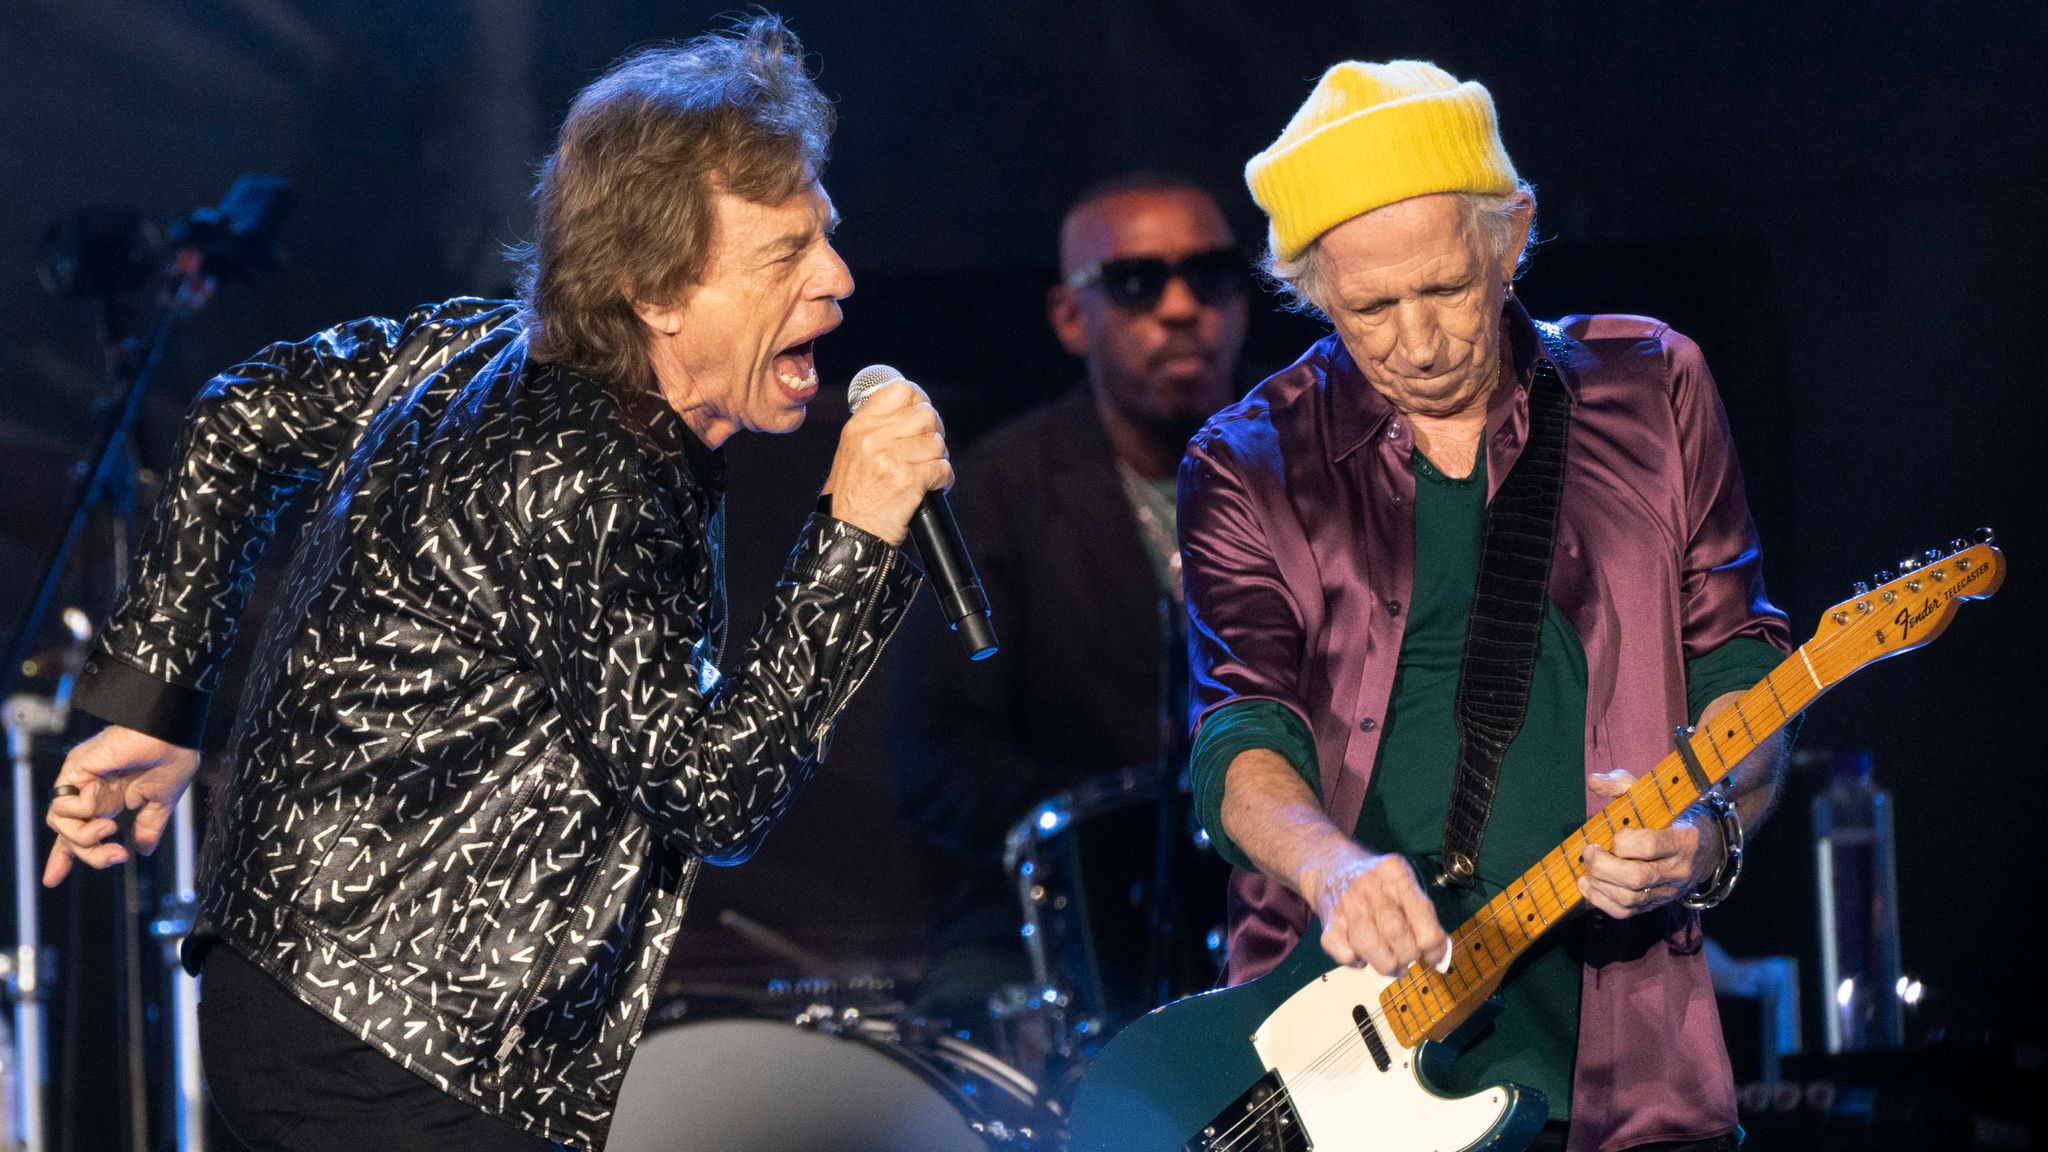 The Rolling Stones Drop Their Song Brown Sugar From Setlists Amid Controversy Over Its Lyrics 6860